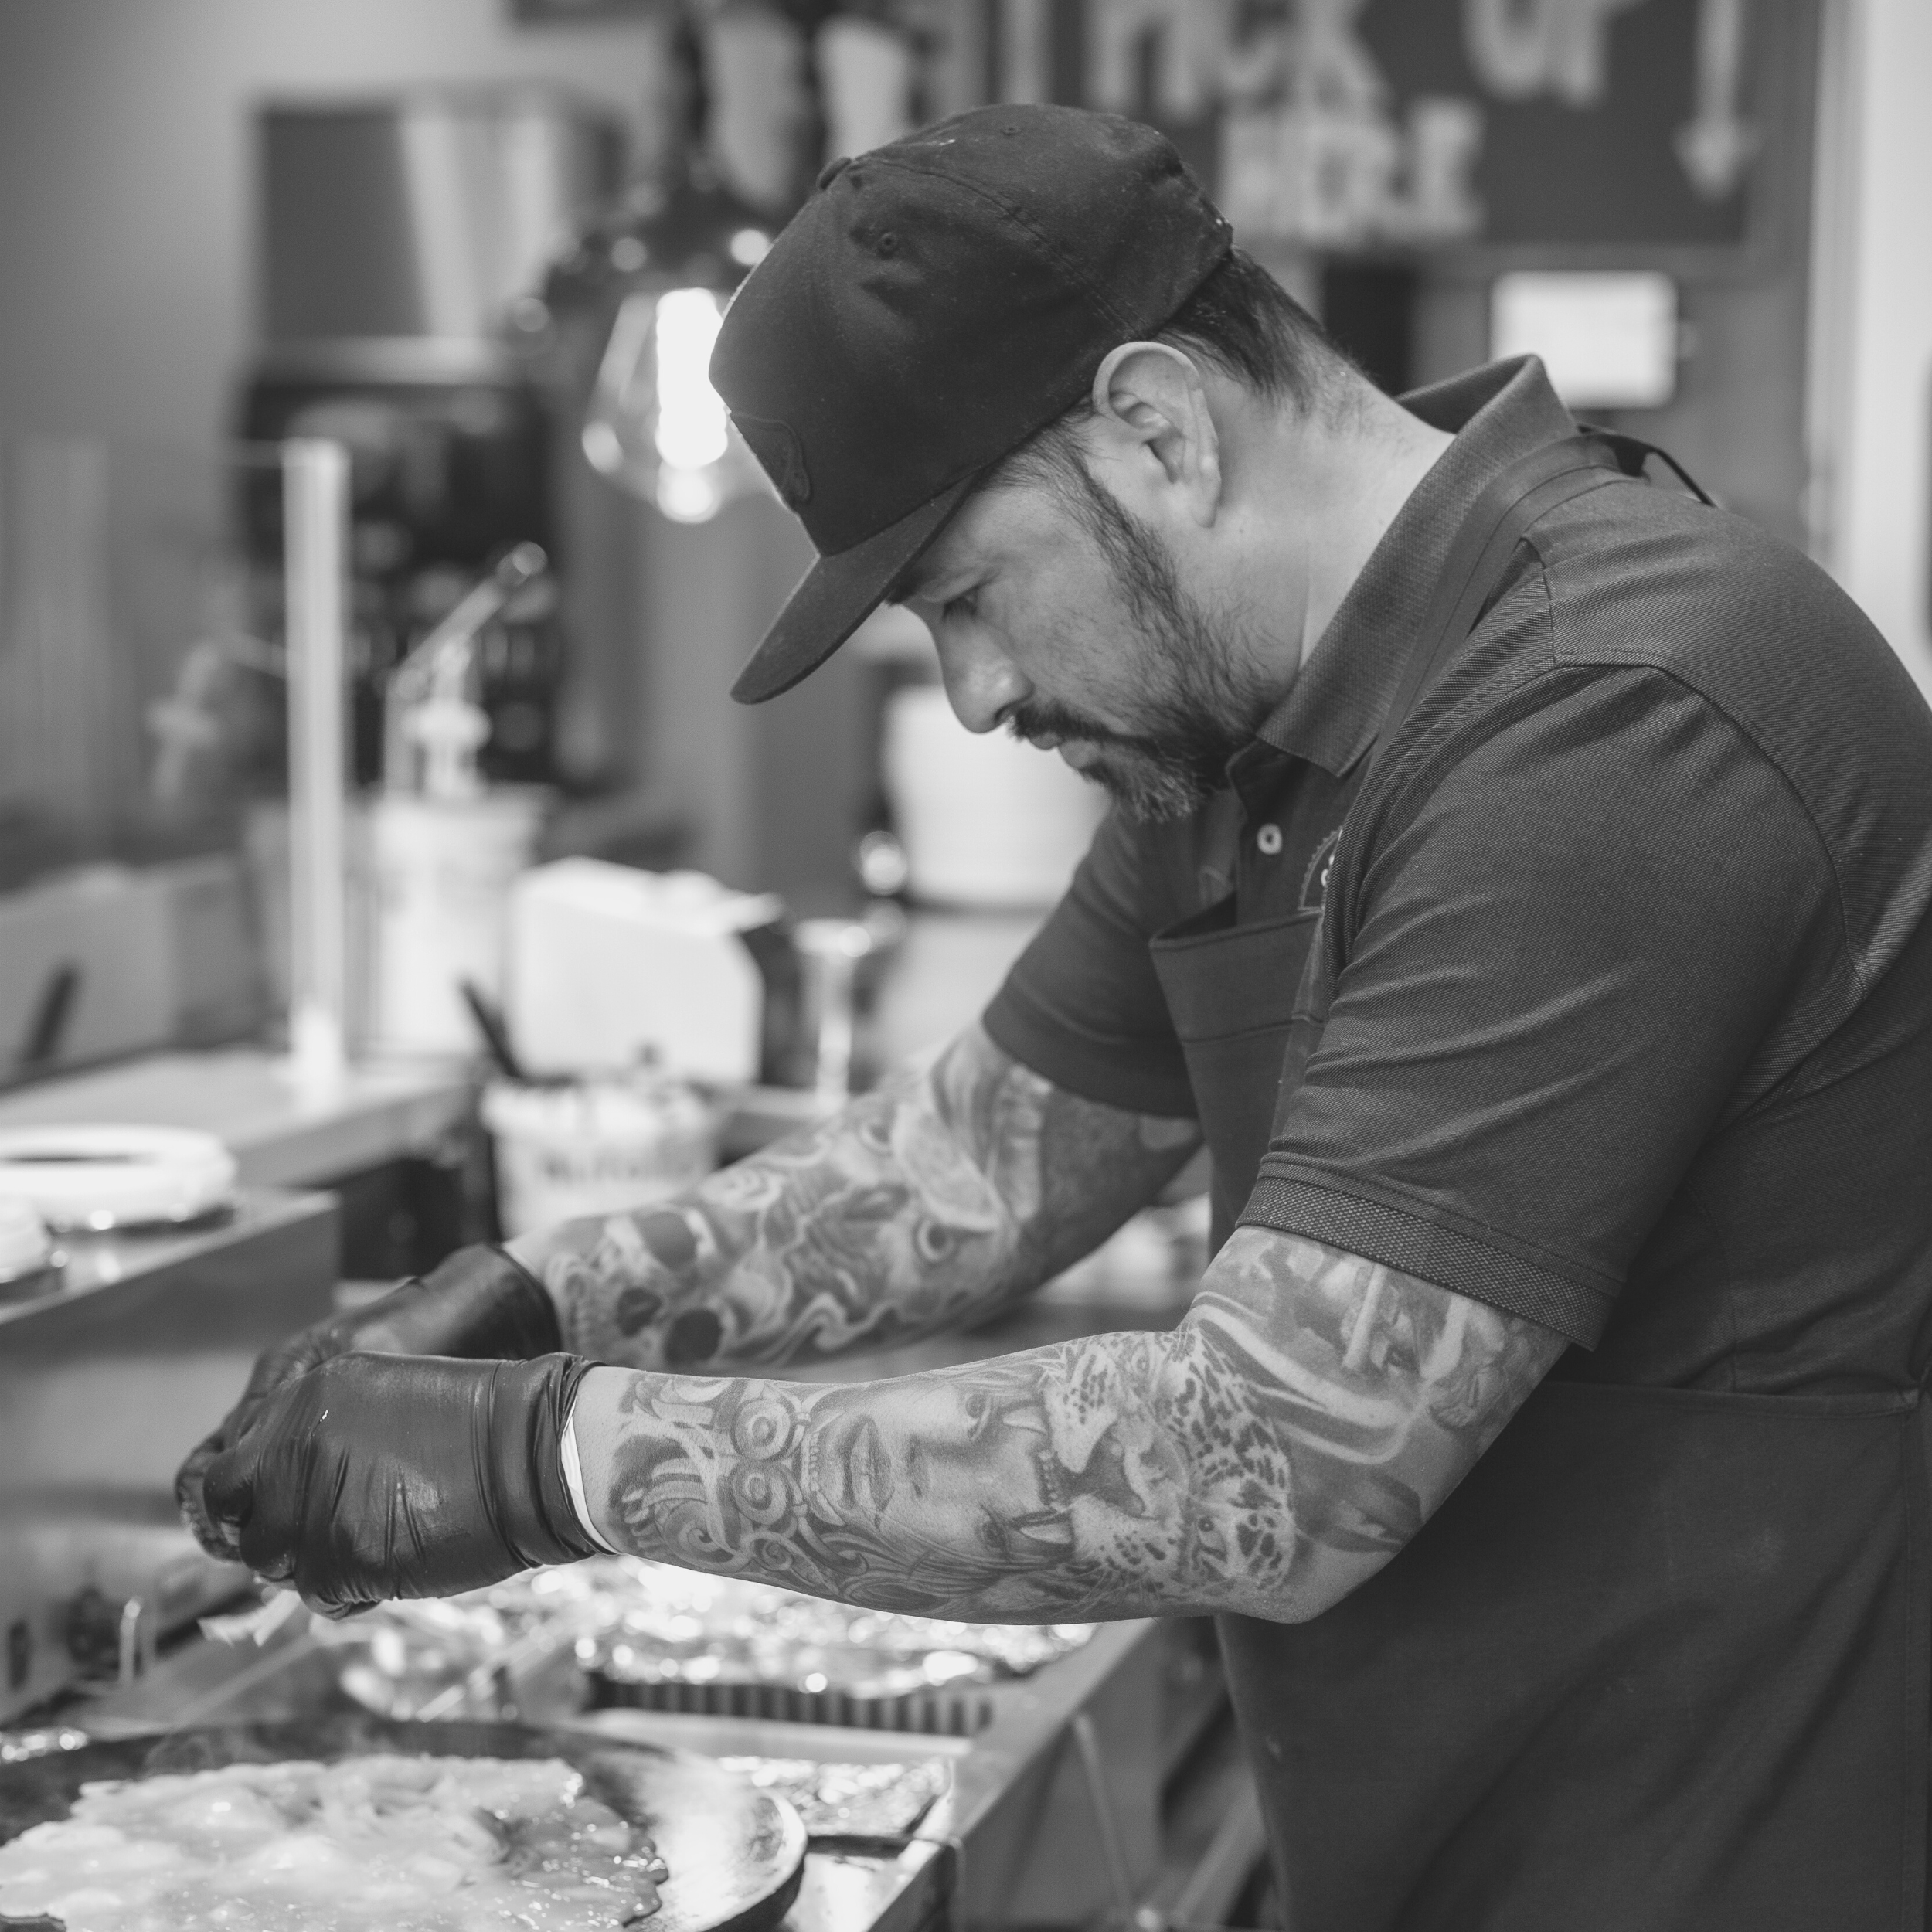 cook-preparing-meal-in-restaurant-with-tattoos-on-arms